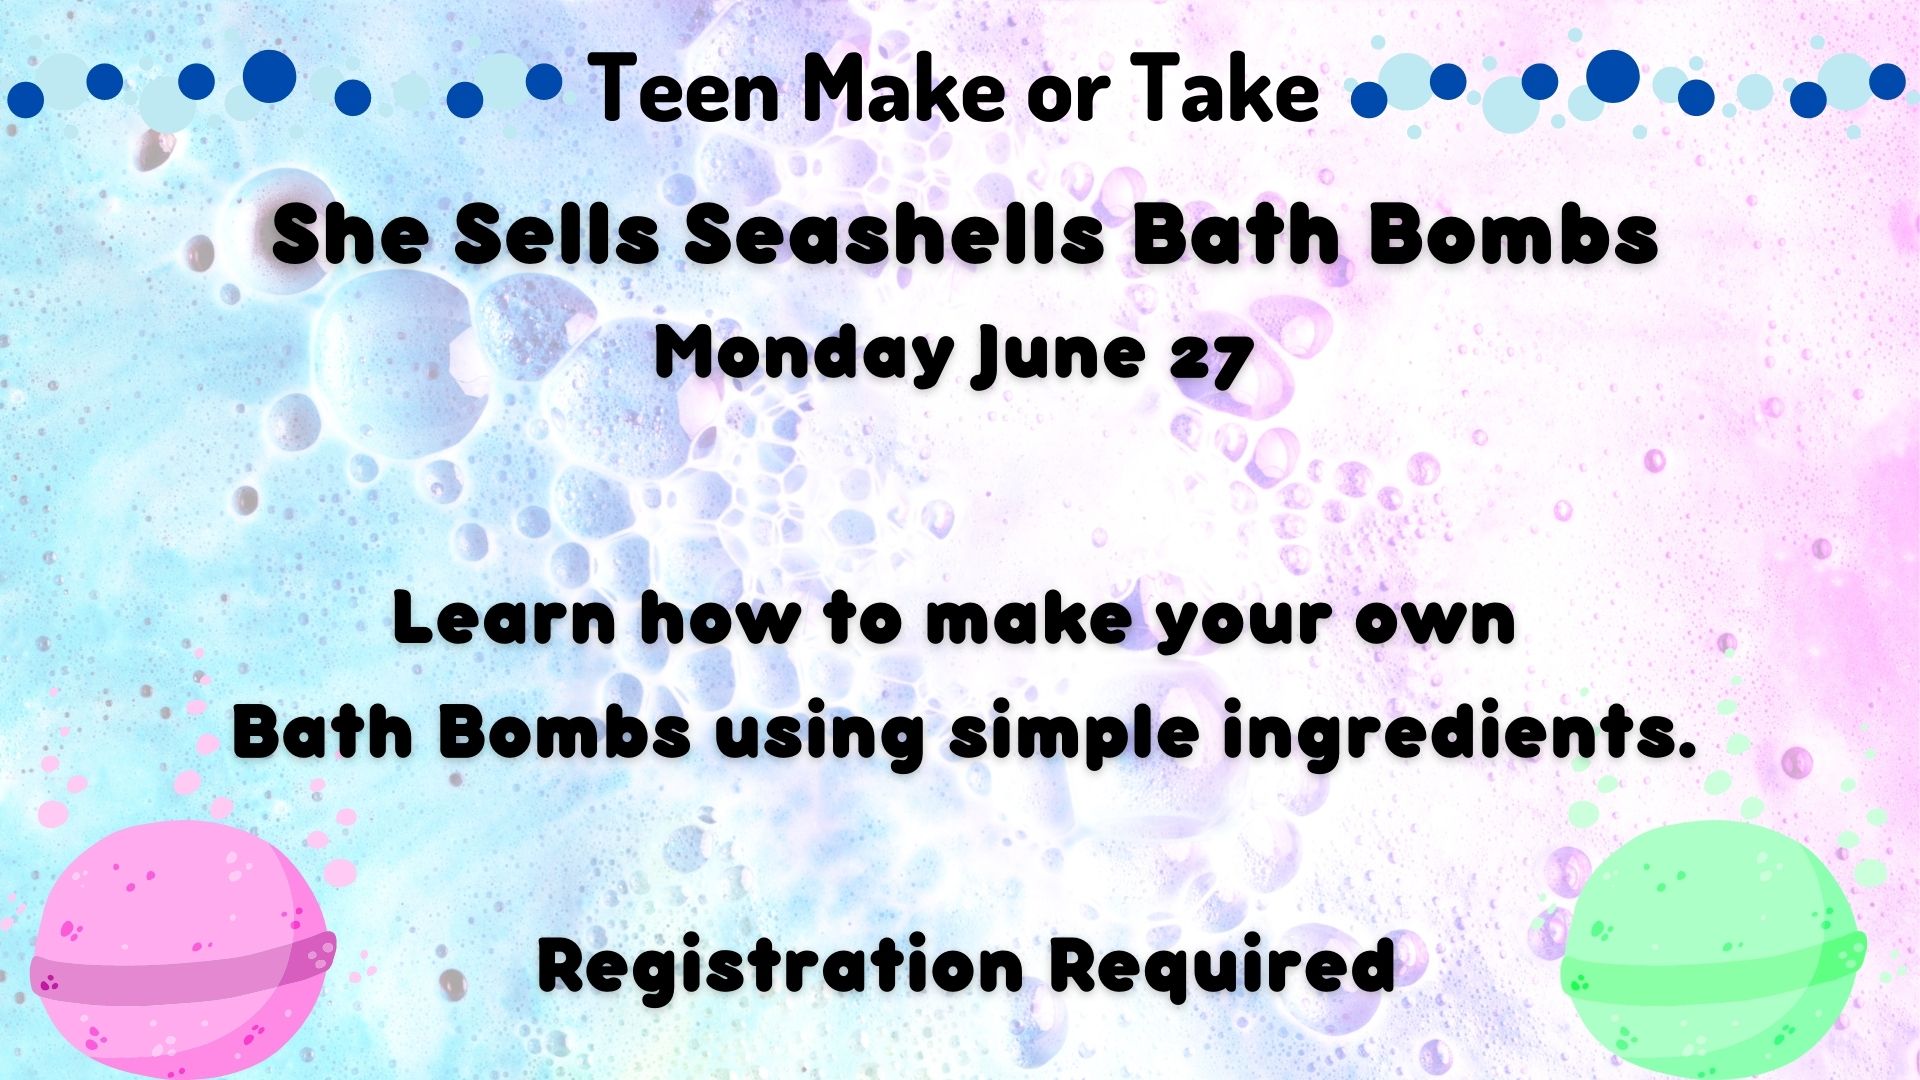 Flyer for Teen Make or Take bath bombs